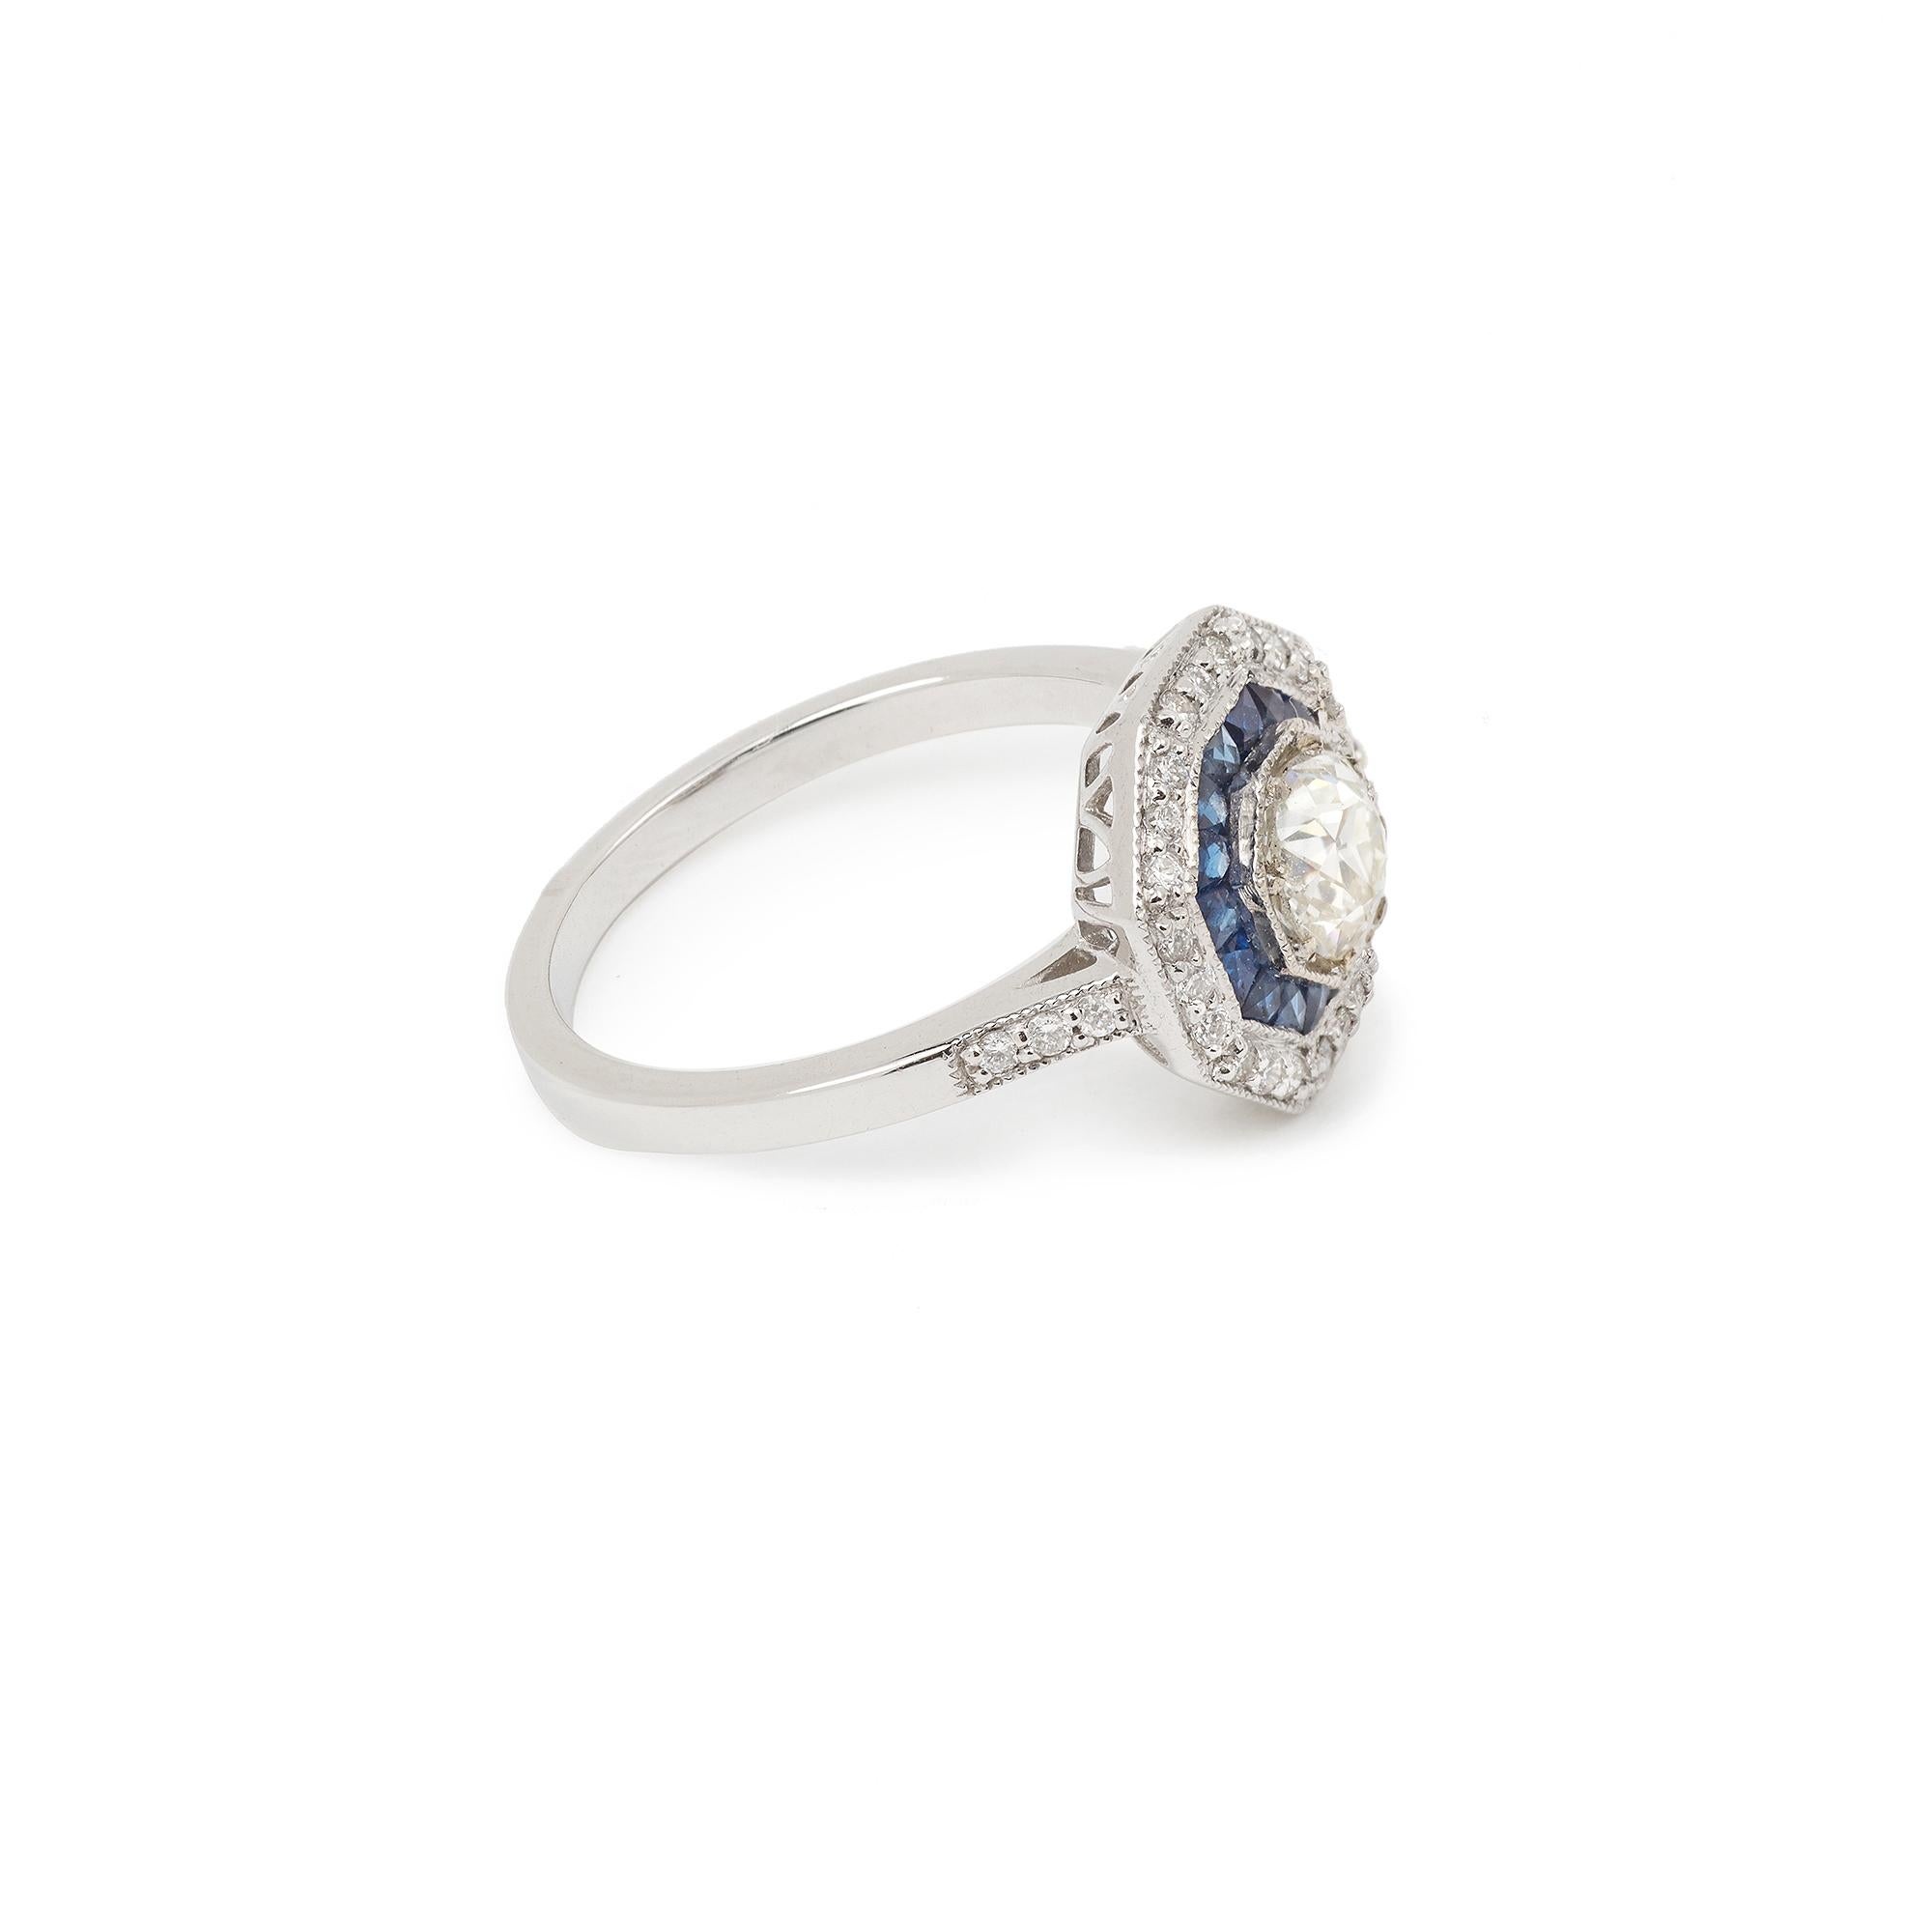 A fine Art Deco style ring in white gold set with a central old cut diamond, small diamonds and sapphires.

Ring size : 11.72 x 16.59 x 5.17 mm, (0.461 x 0.653 x 0.145 inch)

Ring weight : 3.4 g

Central diamond size : 5.47 x 3.75 mm, (0.215 x 0.145